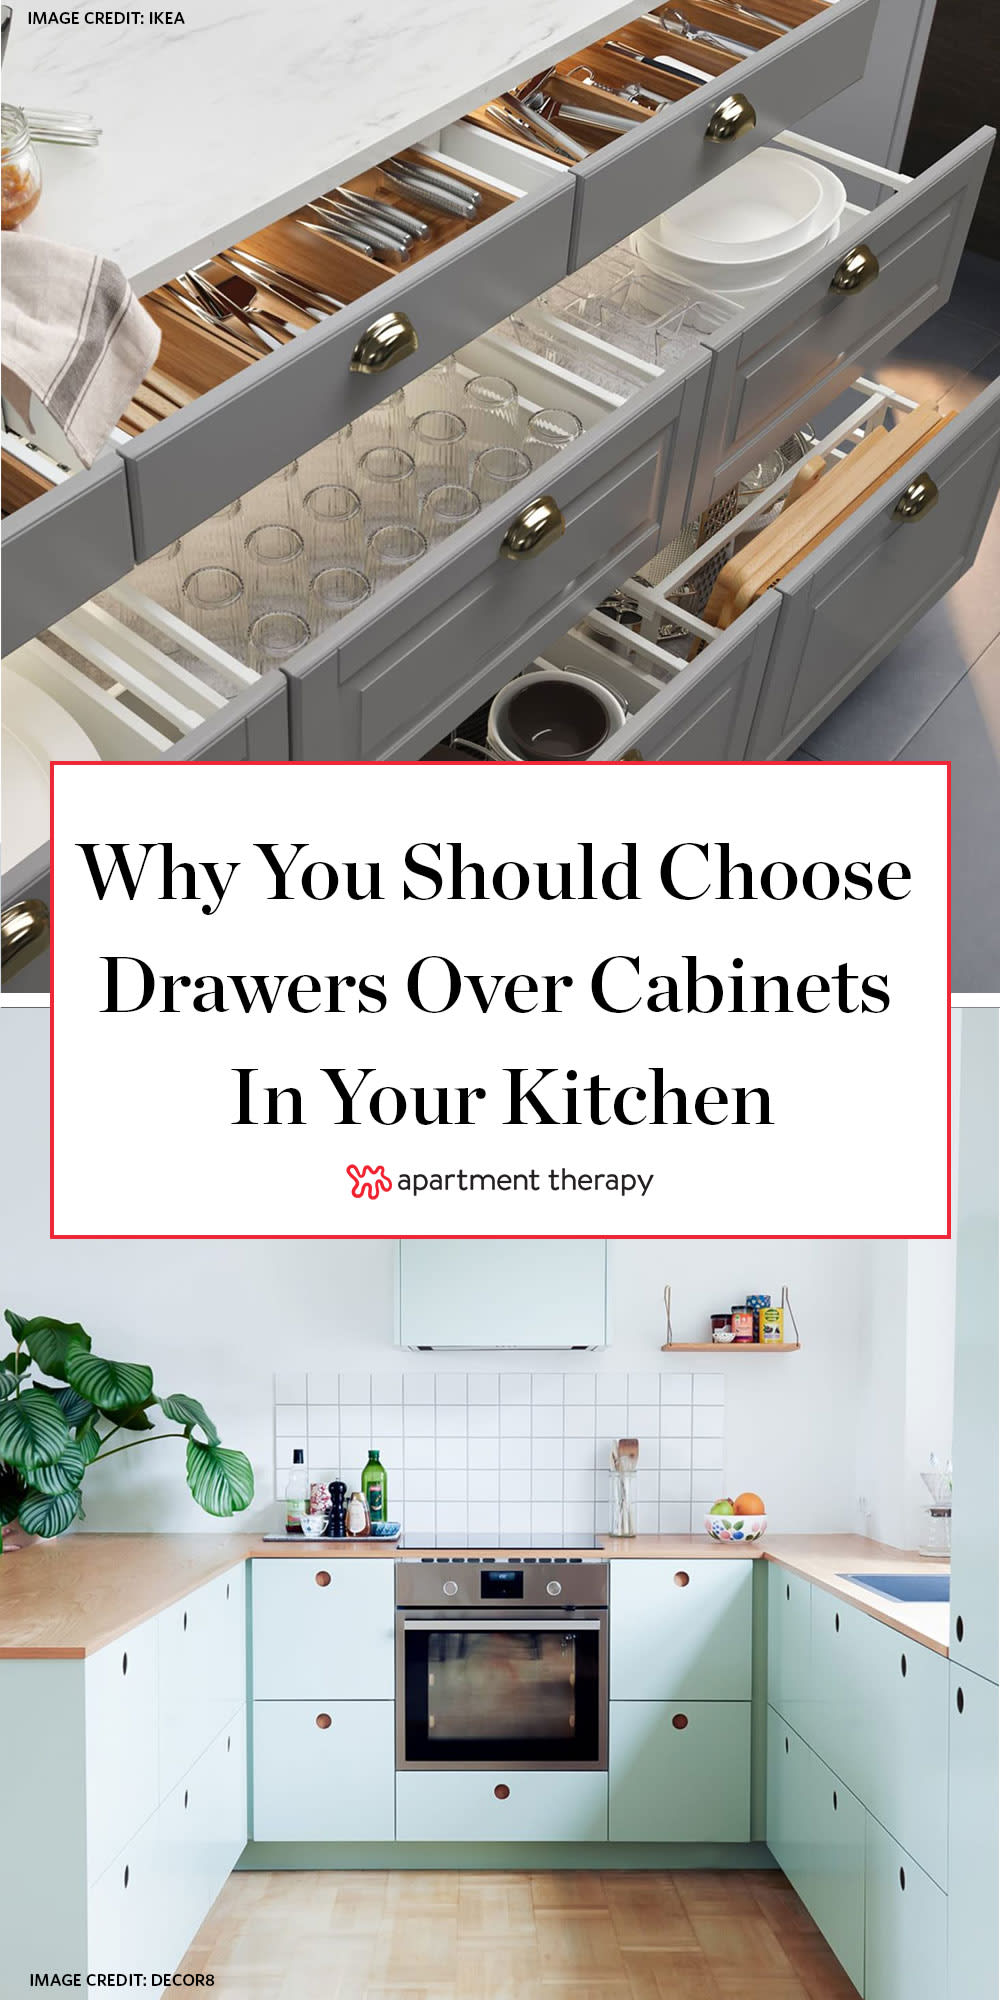 Kitchen Cabinets Versus Drawers Pros Cons Apartment Therapy